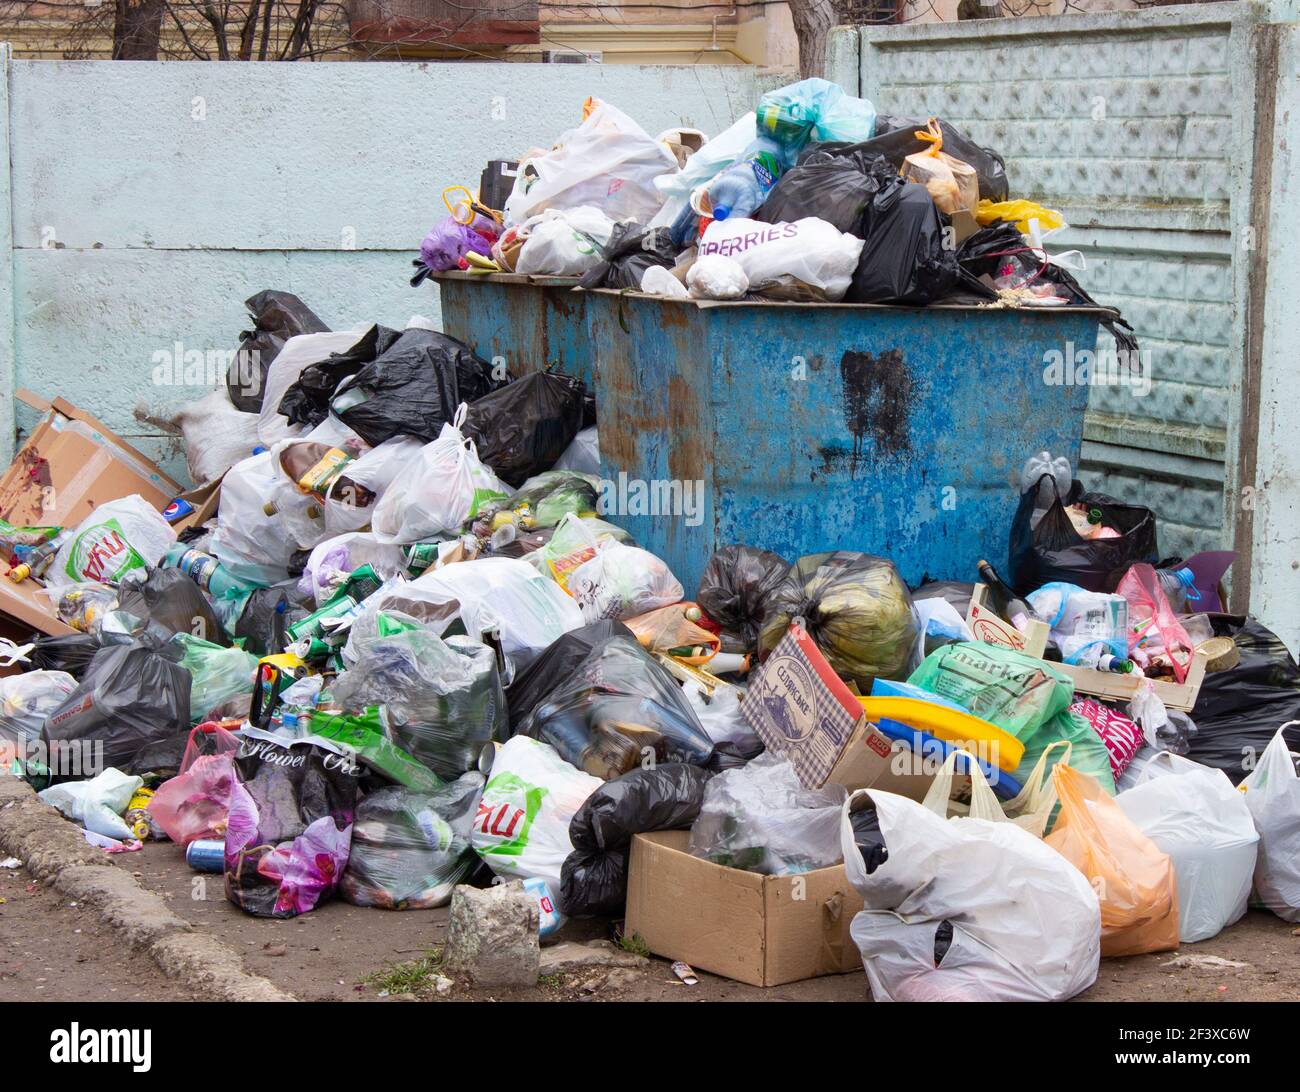 Large garbage cans Stock Photo by ©majorosl66 68949609